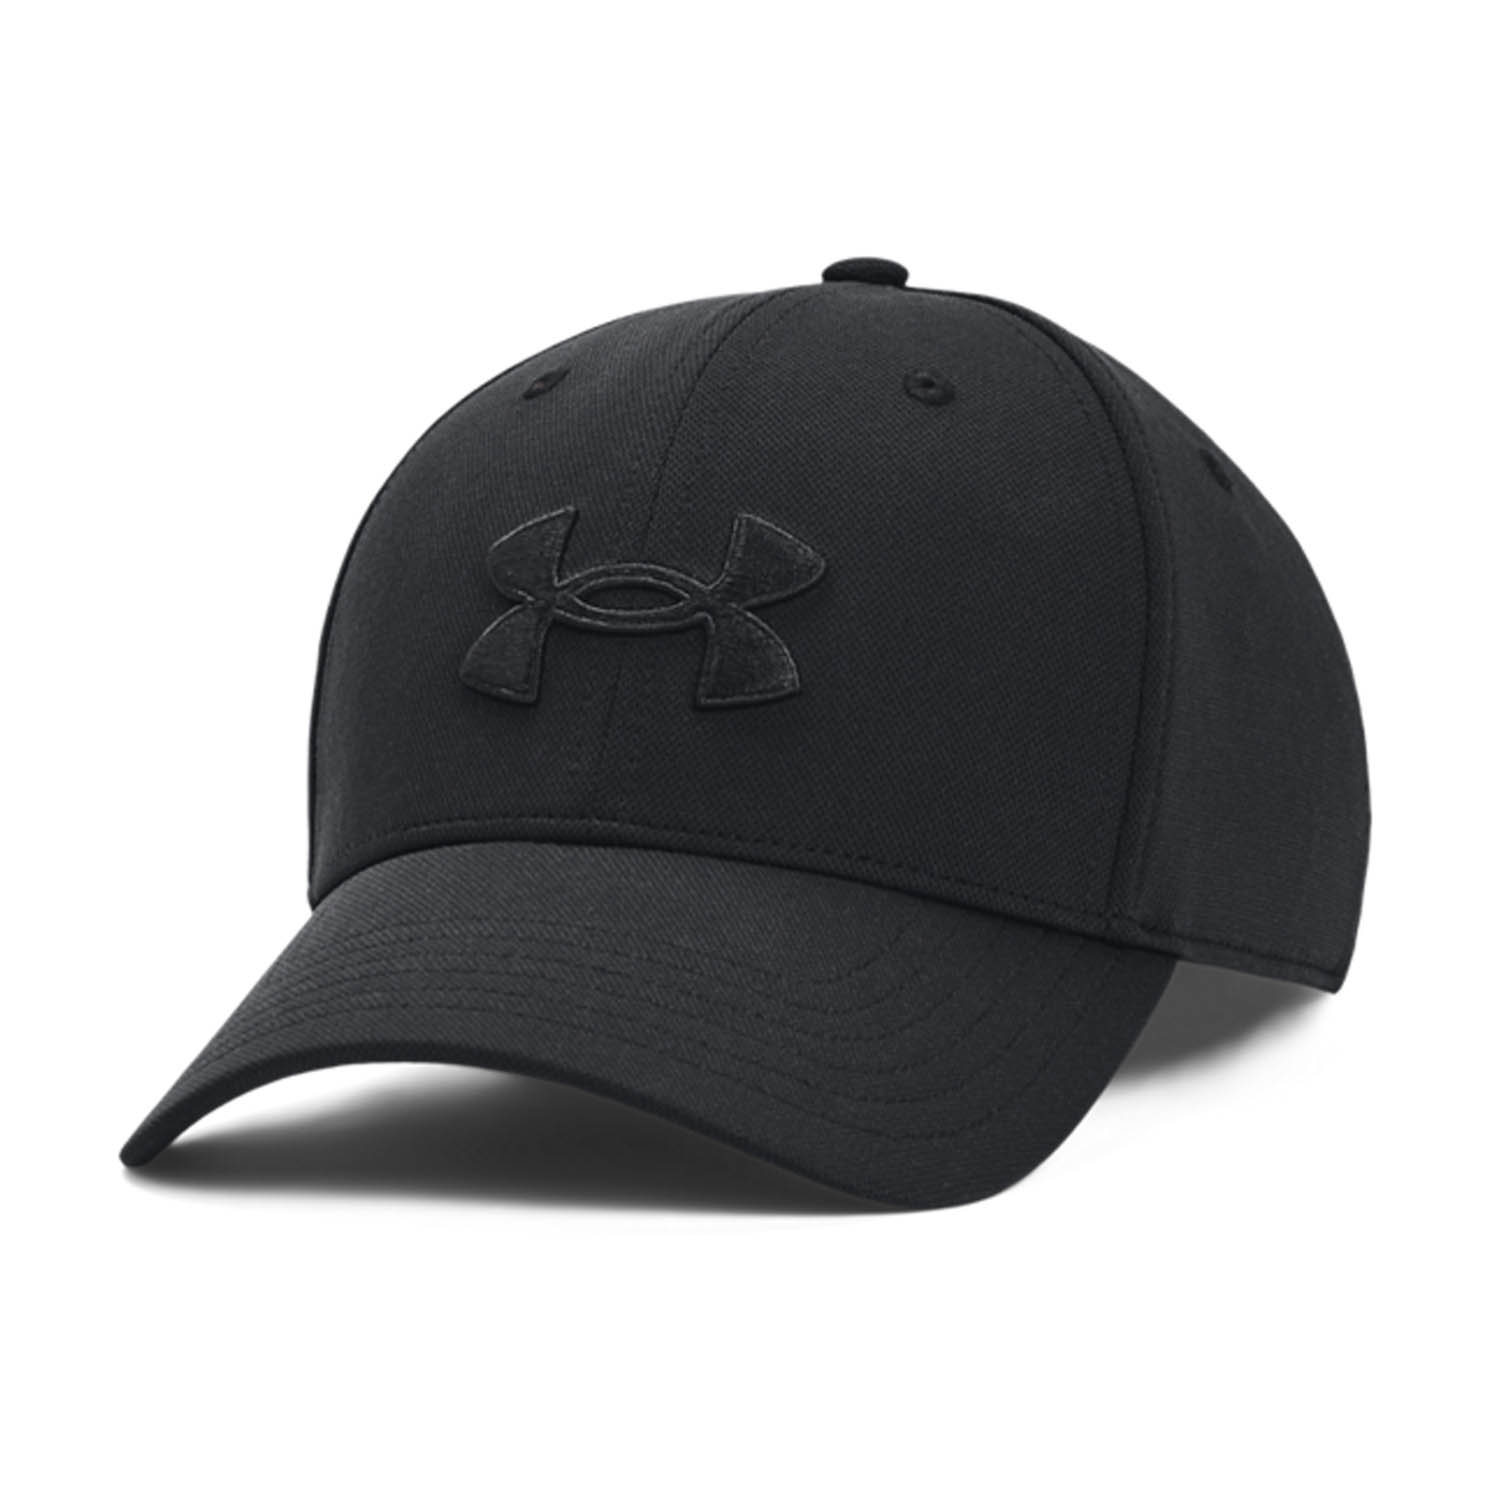 Under Armour Blitzing Cappello - All Black